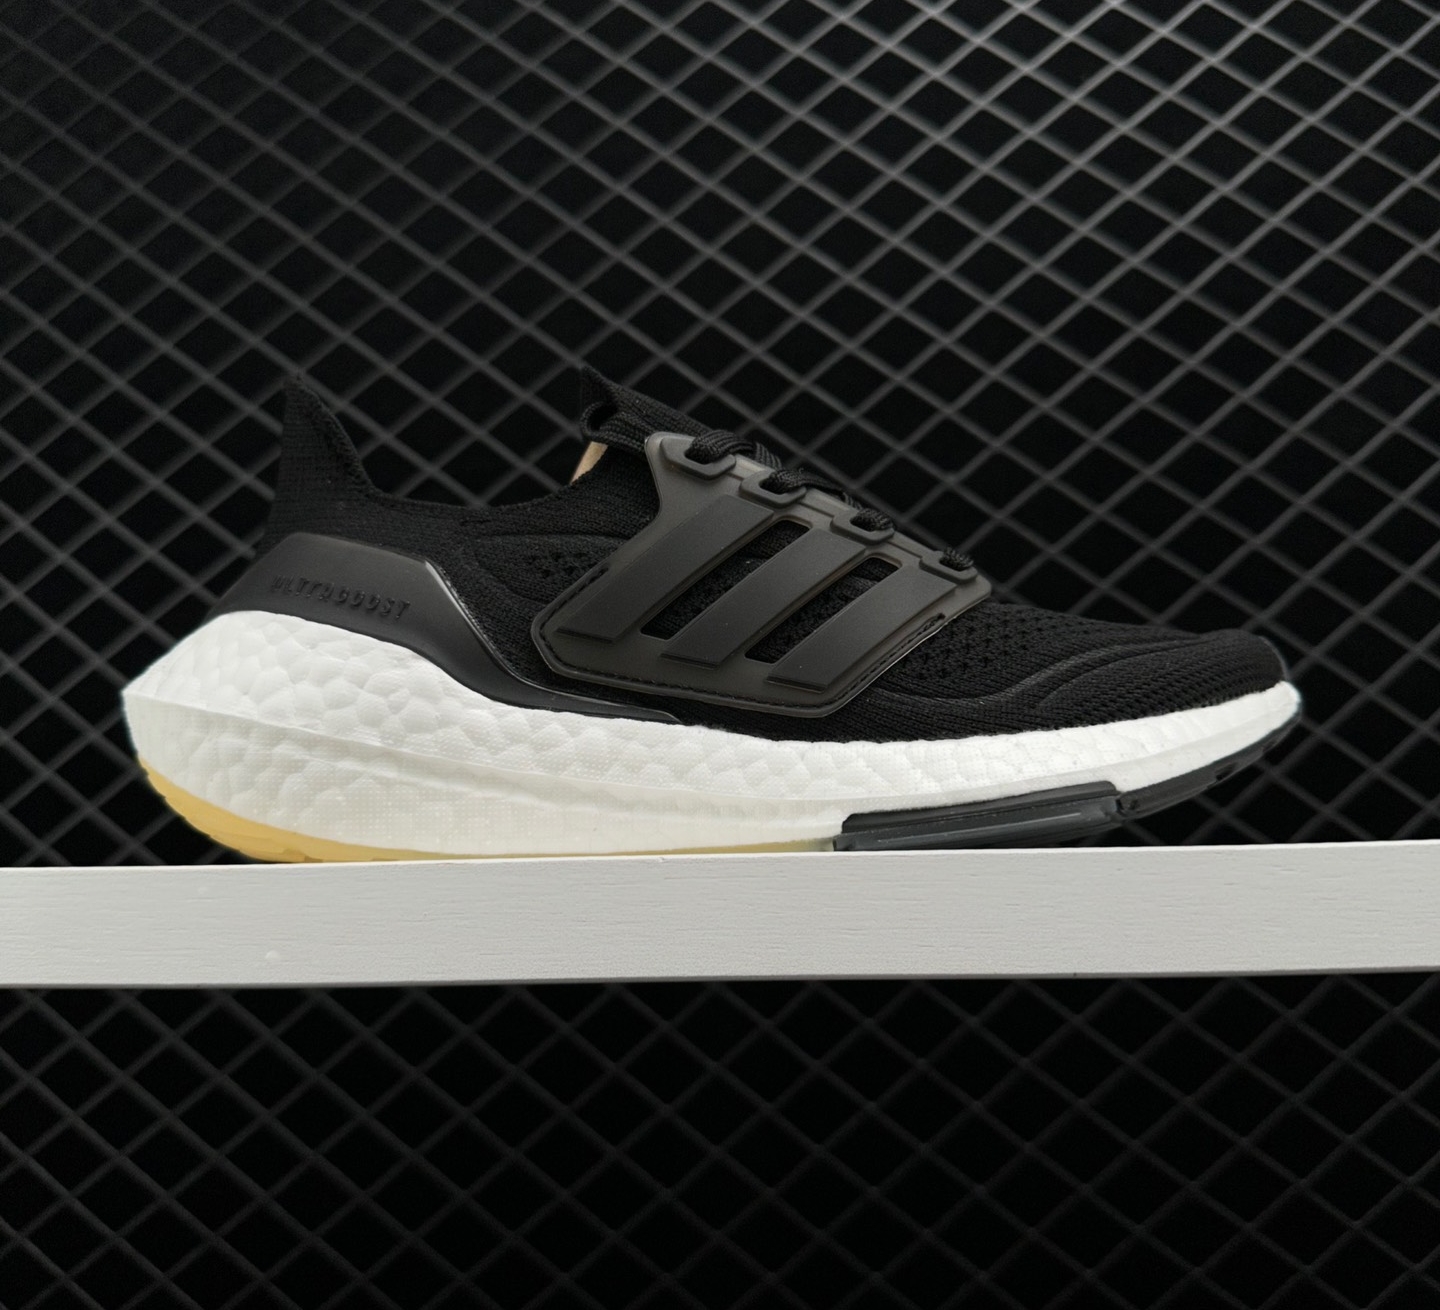 Adidas UltraBoost 21 'Core Black' FY0378 - Stylish and High-performance Running Shoes